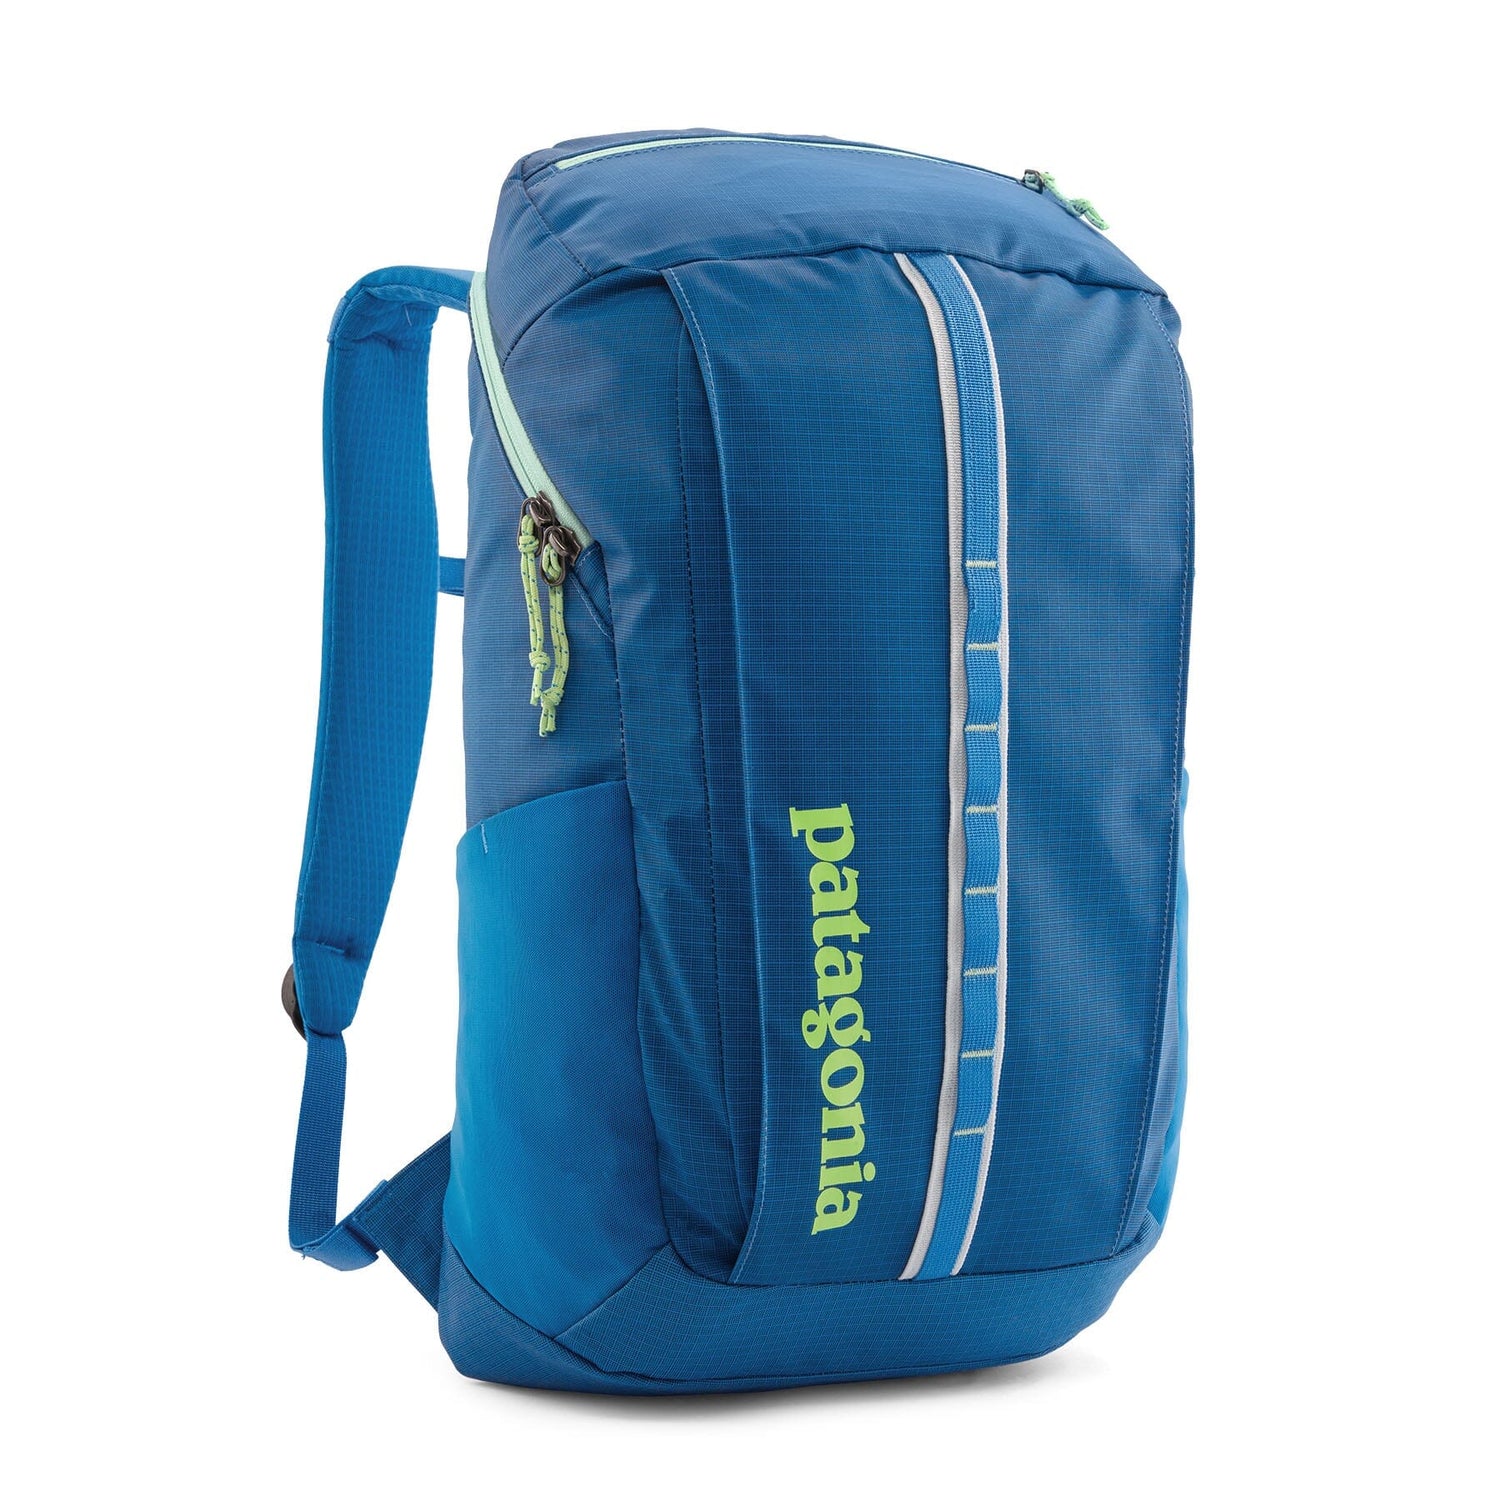 Patagonia - Black Hole Pack 25L - 100% Recycled Polyester - Weekendbee - sustainable sportswear